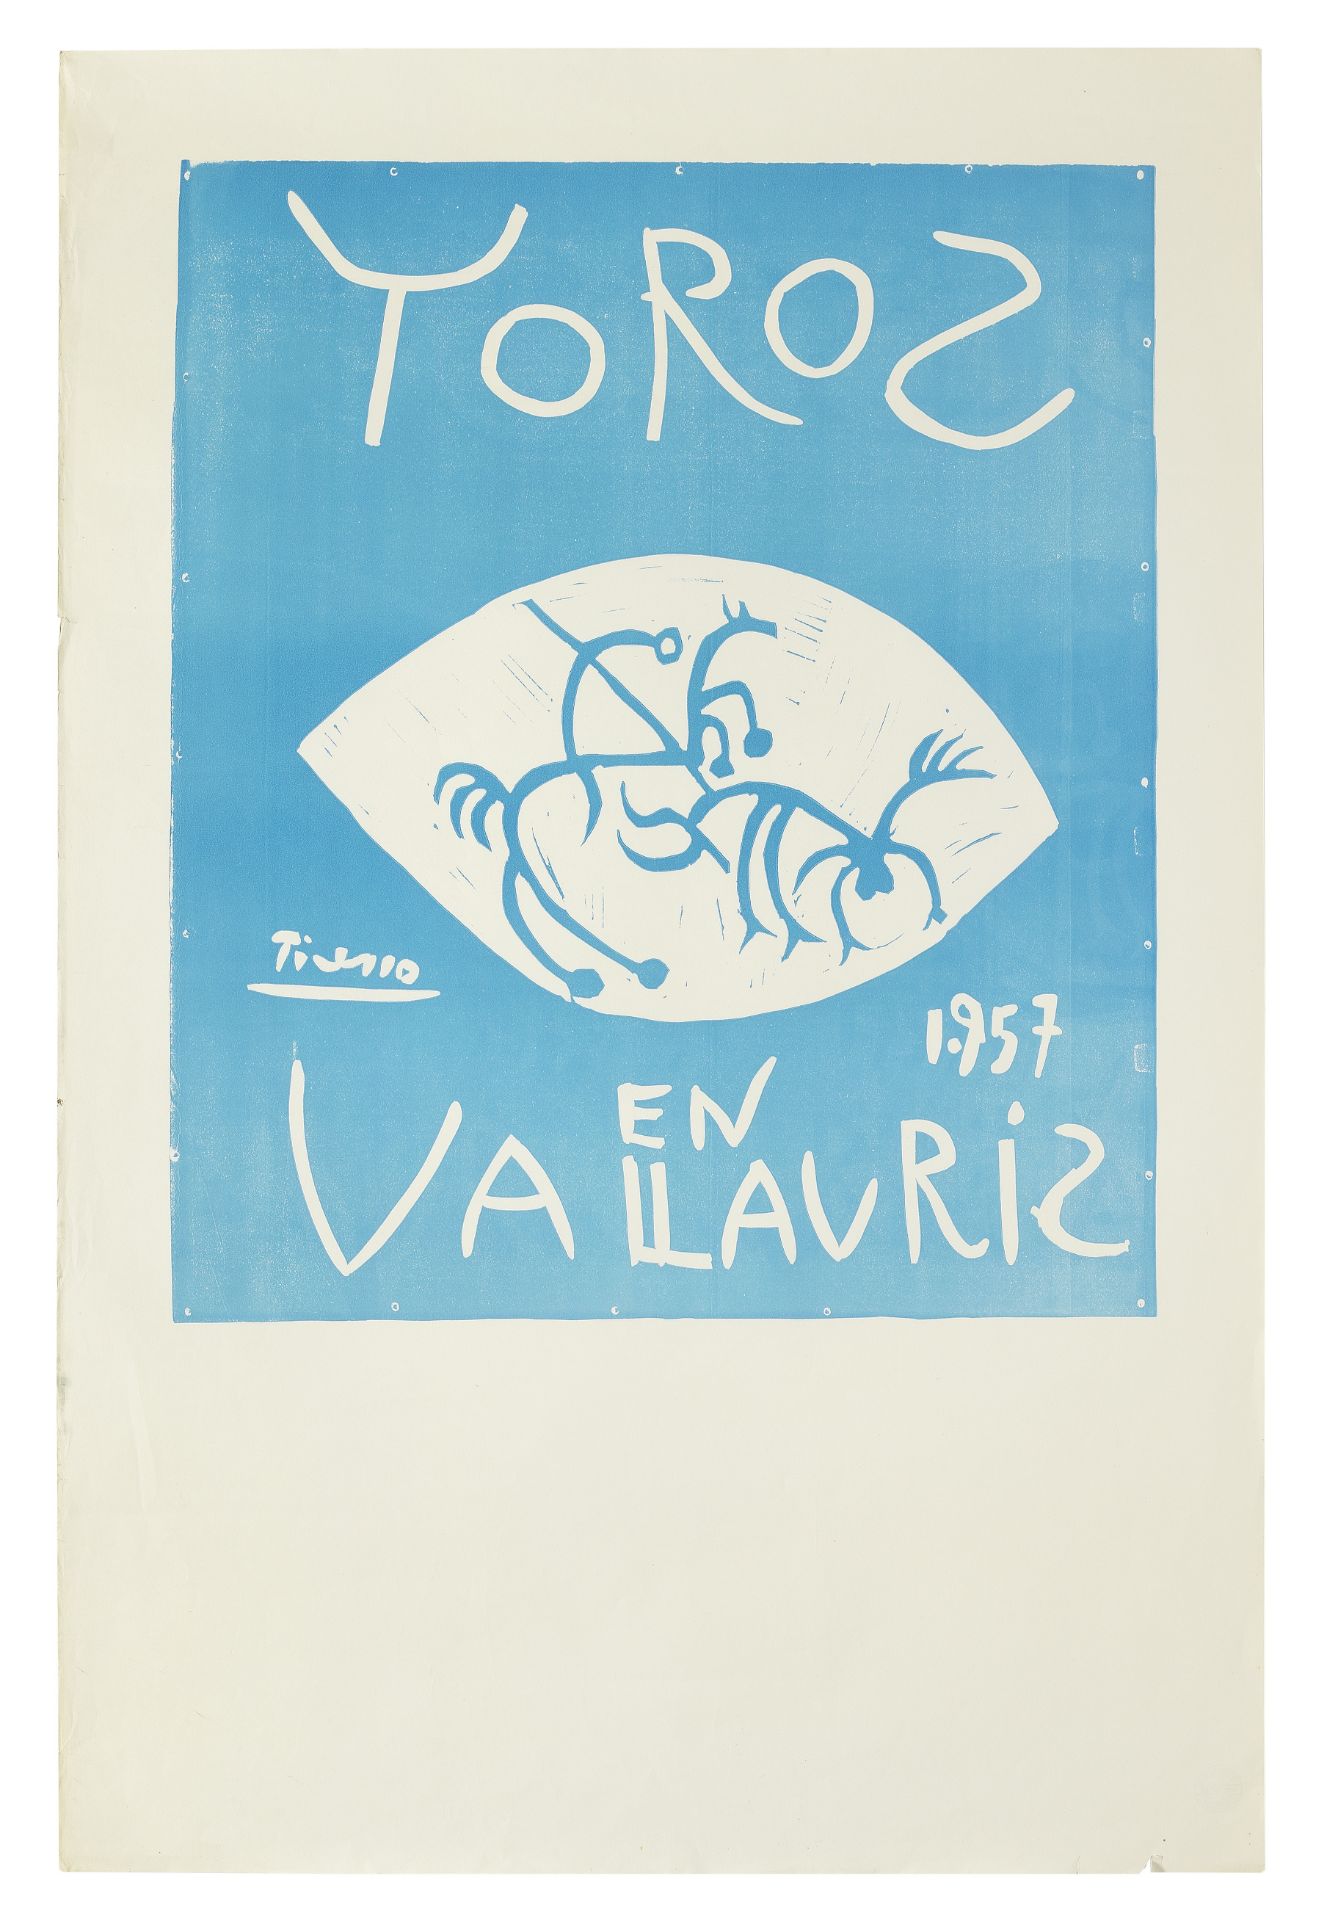 Pablo Picasso (1881-1973) Toros en Vallauris 1, 1957 (This work is a proof aside from the edition...